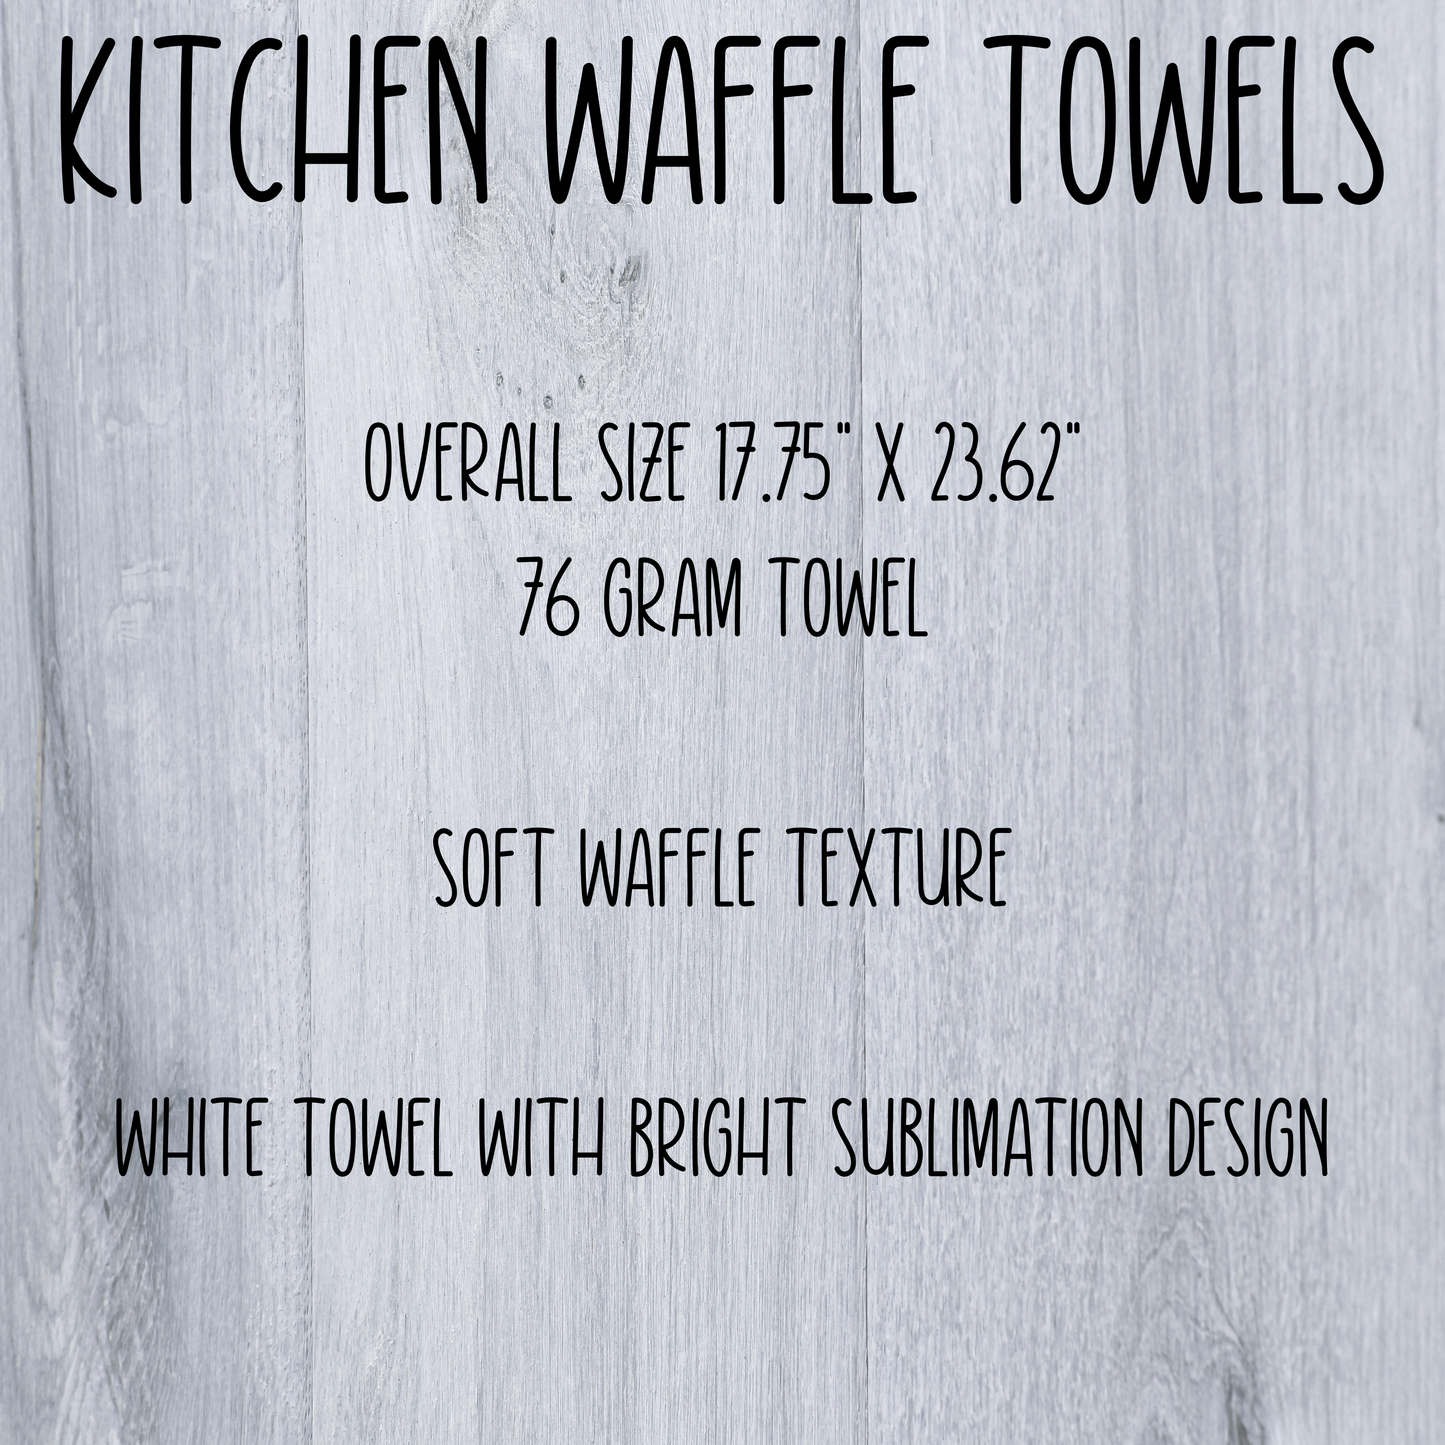 Queen of the Kitchen - Vintage Style Kitchen Waffle Towel